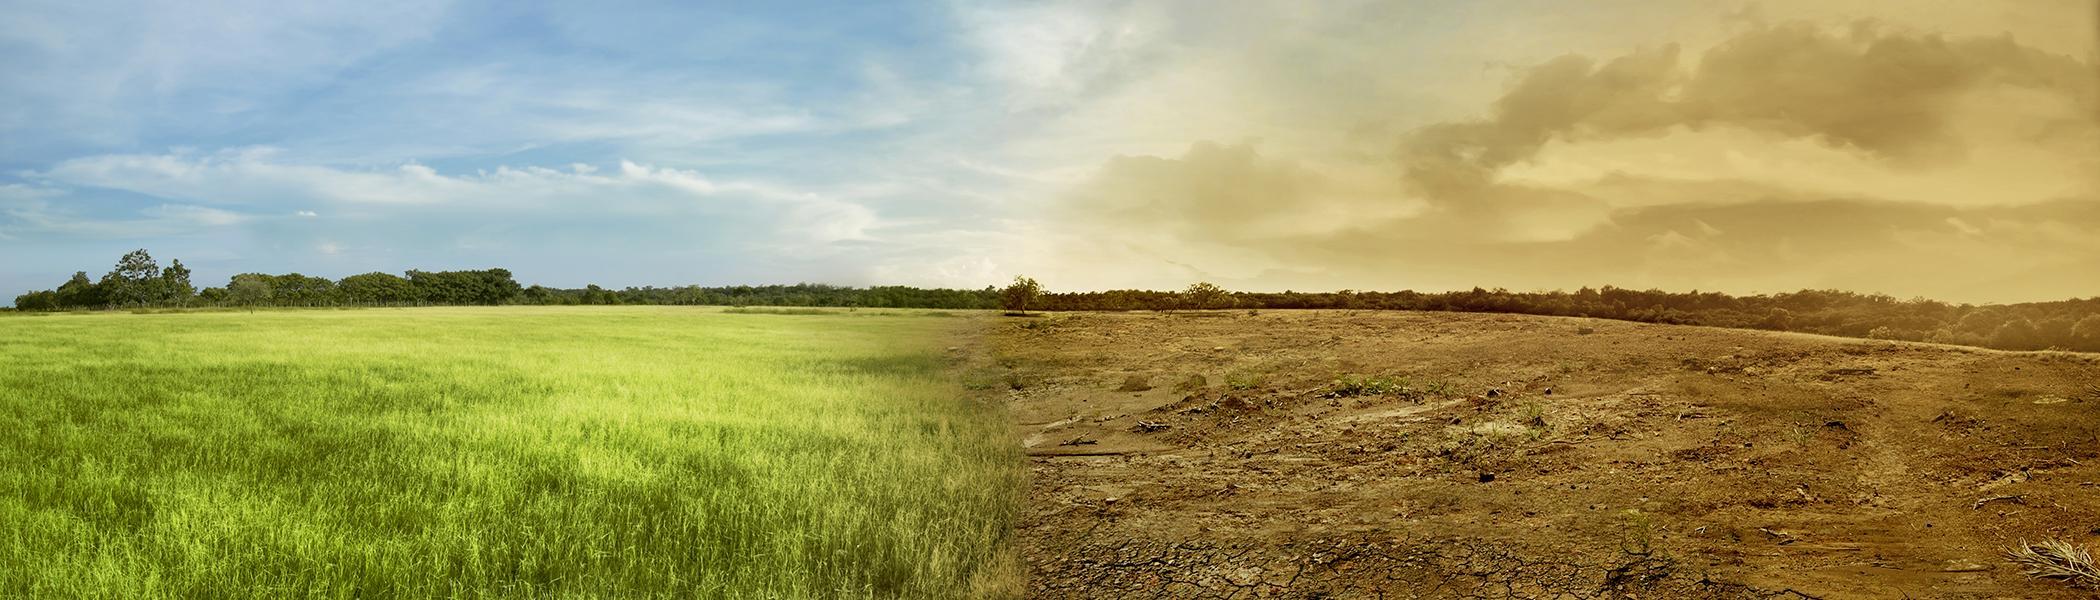 A landscape image of a green healthy field merged in the centre with a dry unhealthy field. 